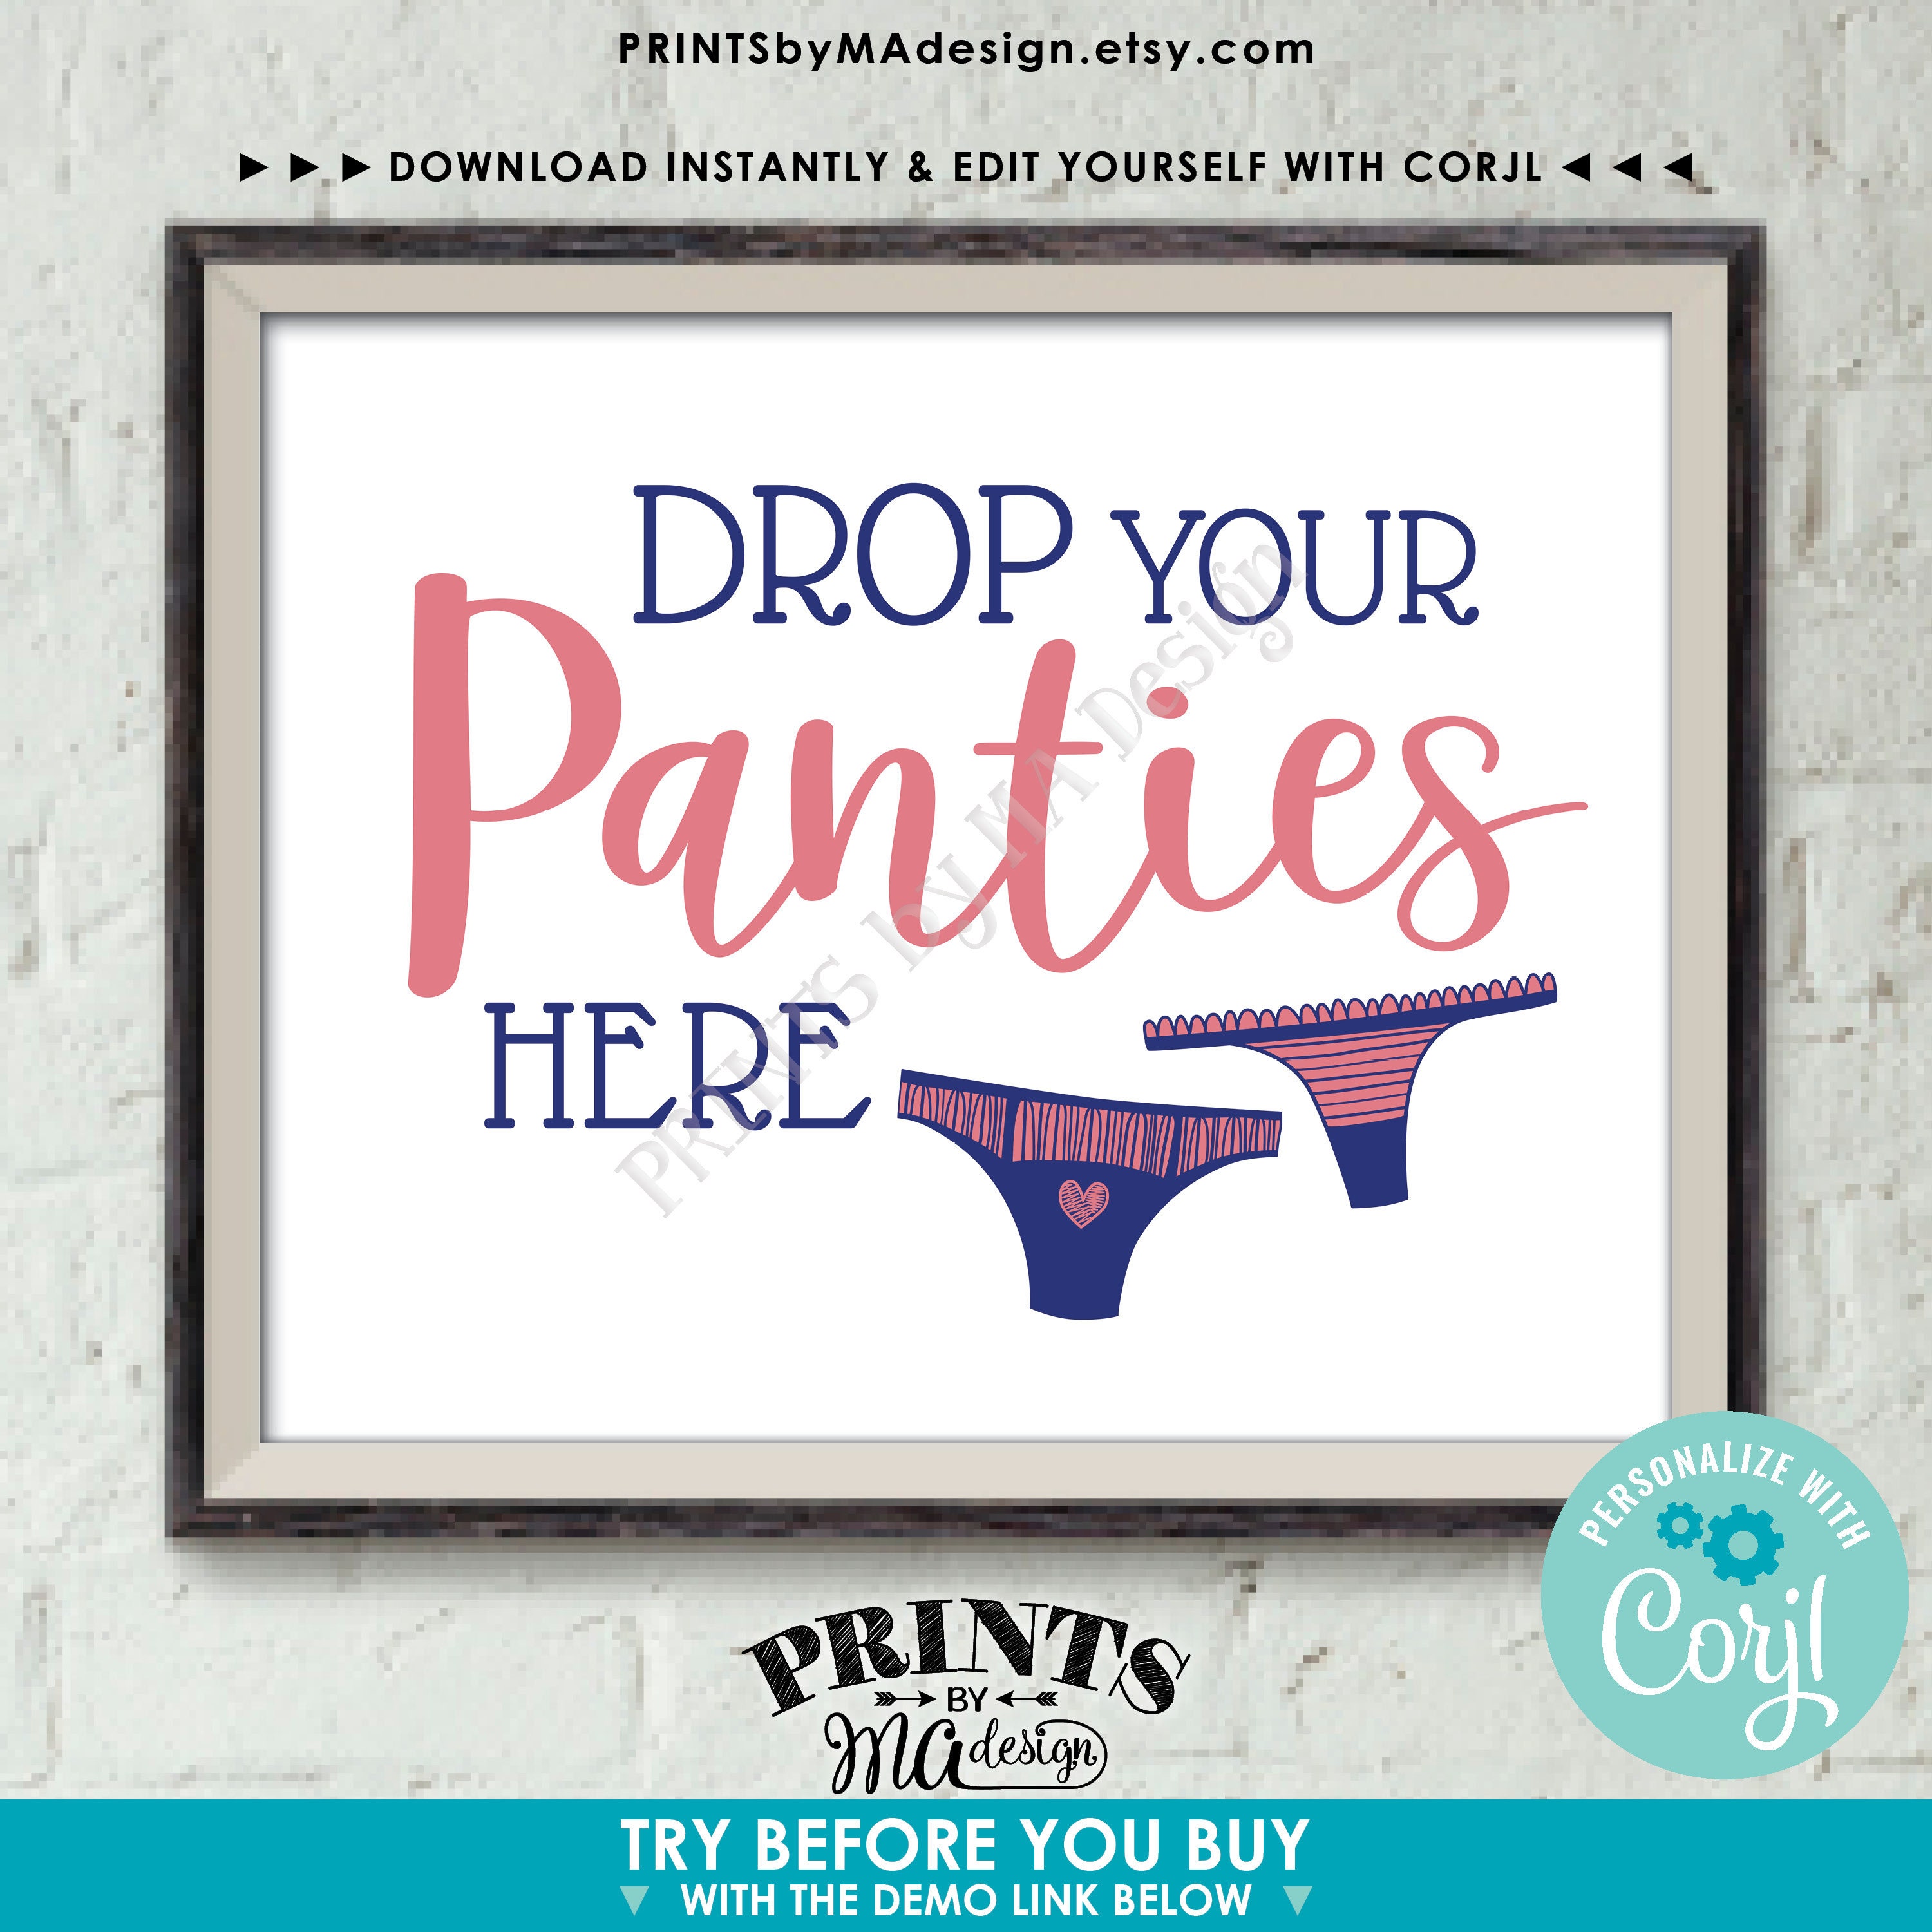 Drop Panties Here Panty Game, Bridal Shower, Bachelorette Party